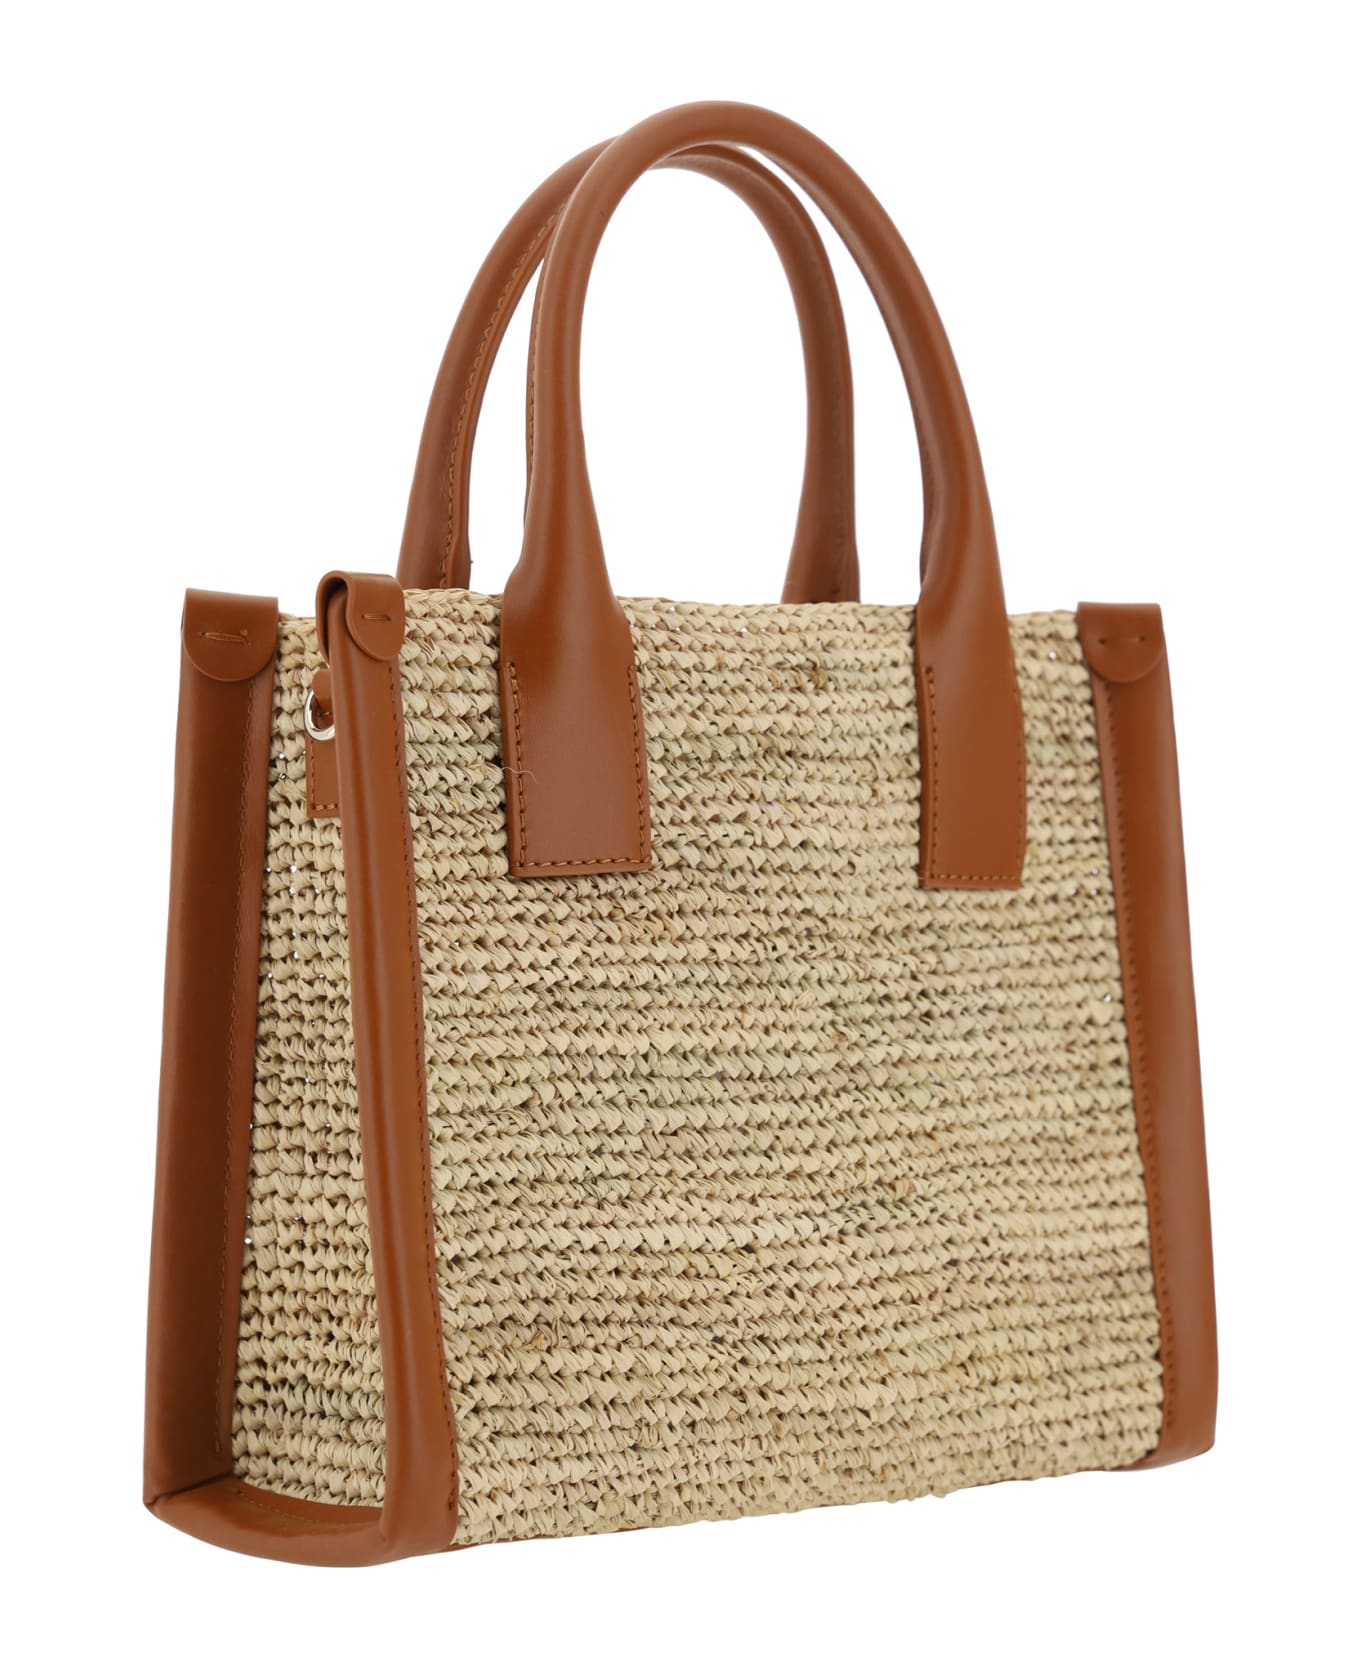 Christian Louboutin By My Side Mini Tote Handbag - Natural/cuoio